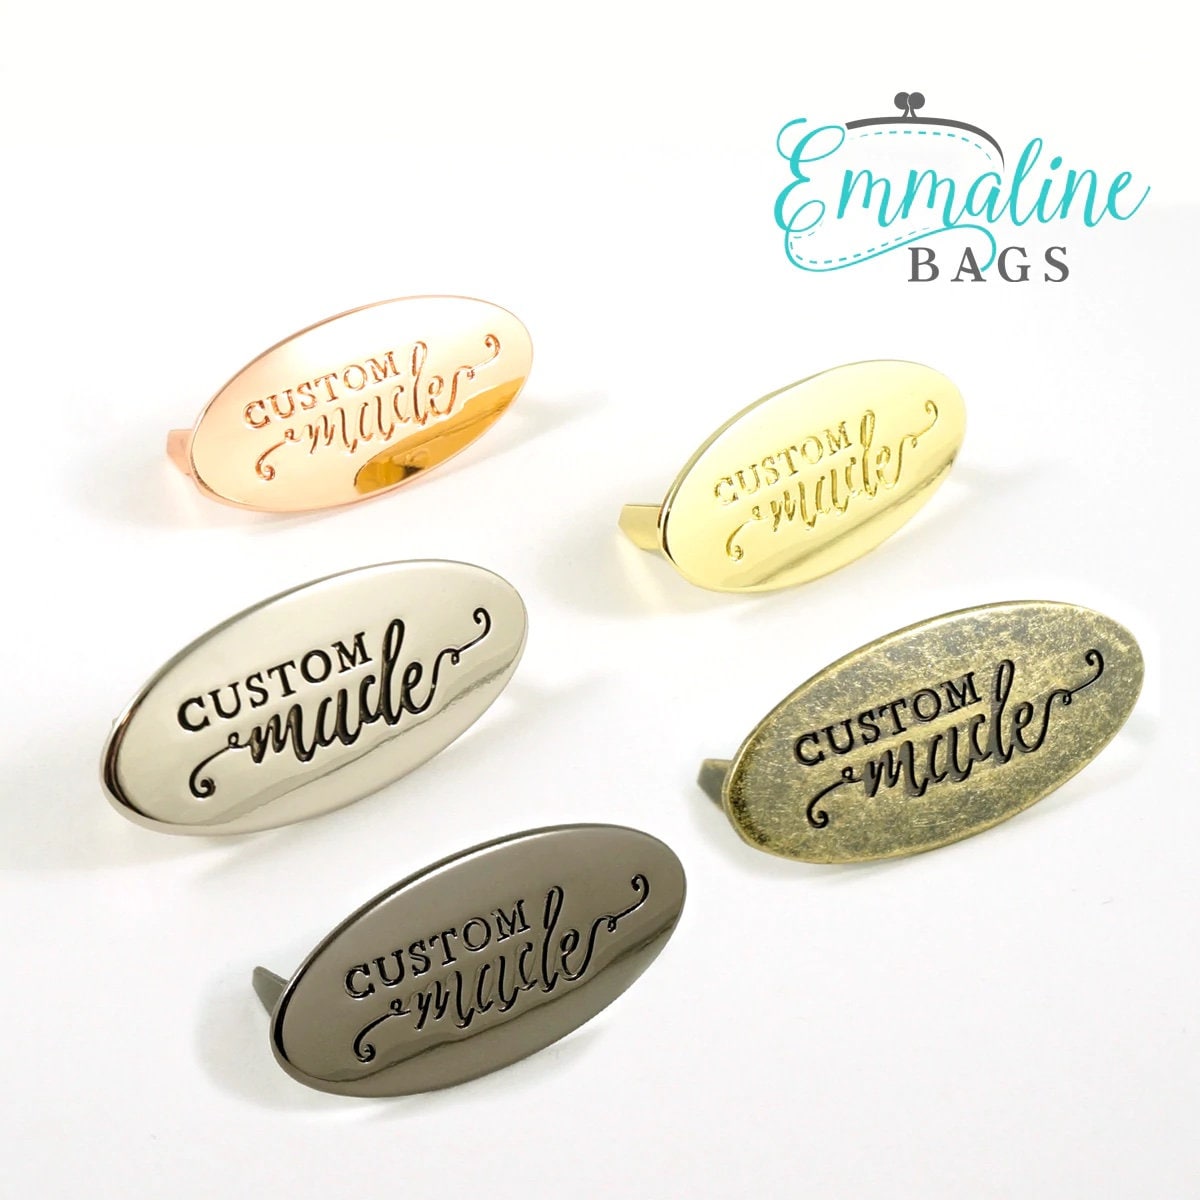 Metal Bag Label - Oval With "Custom Made"